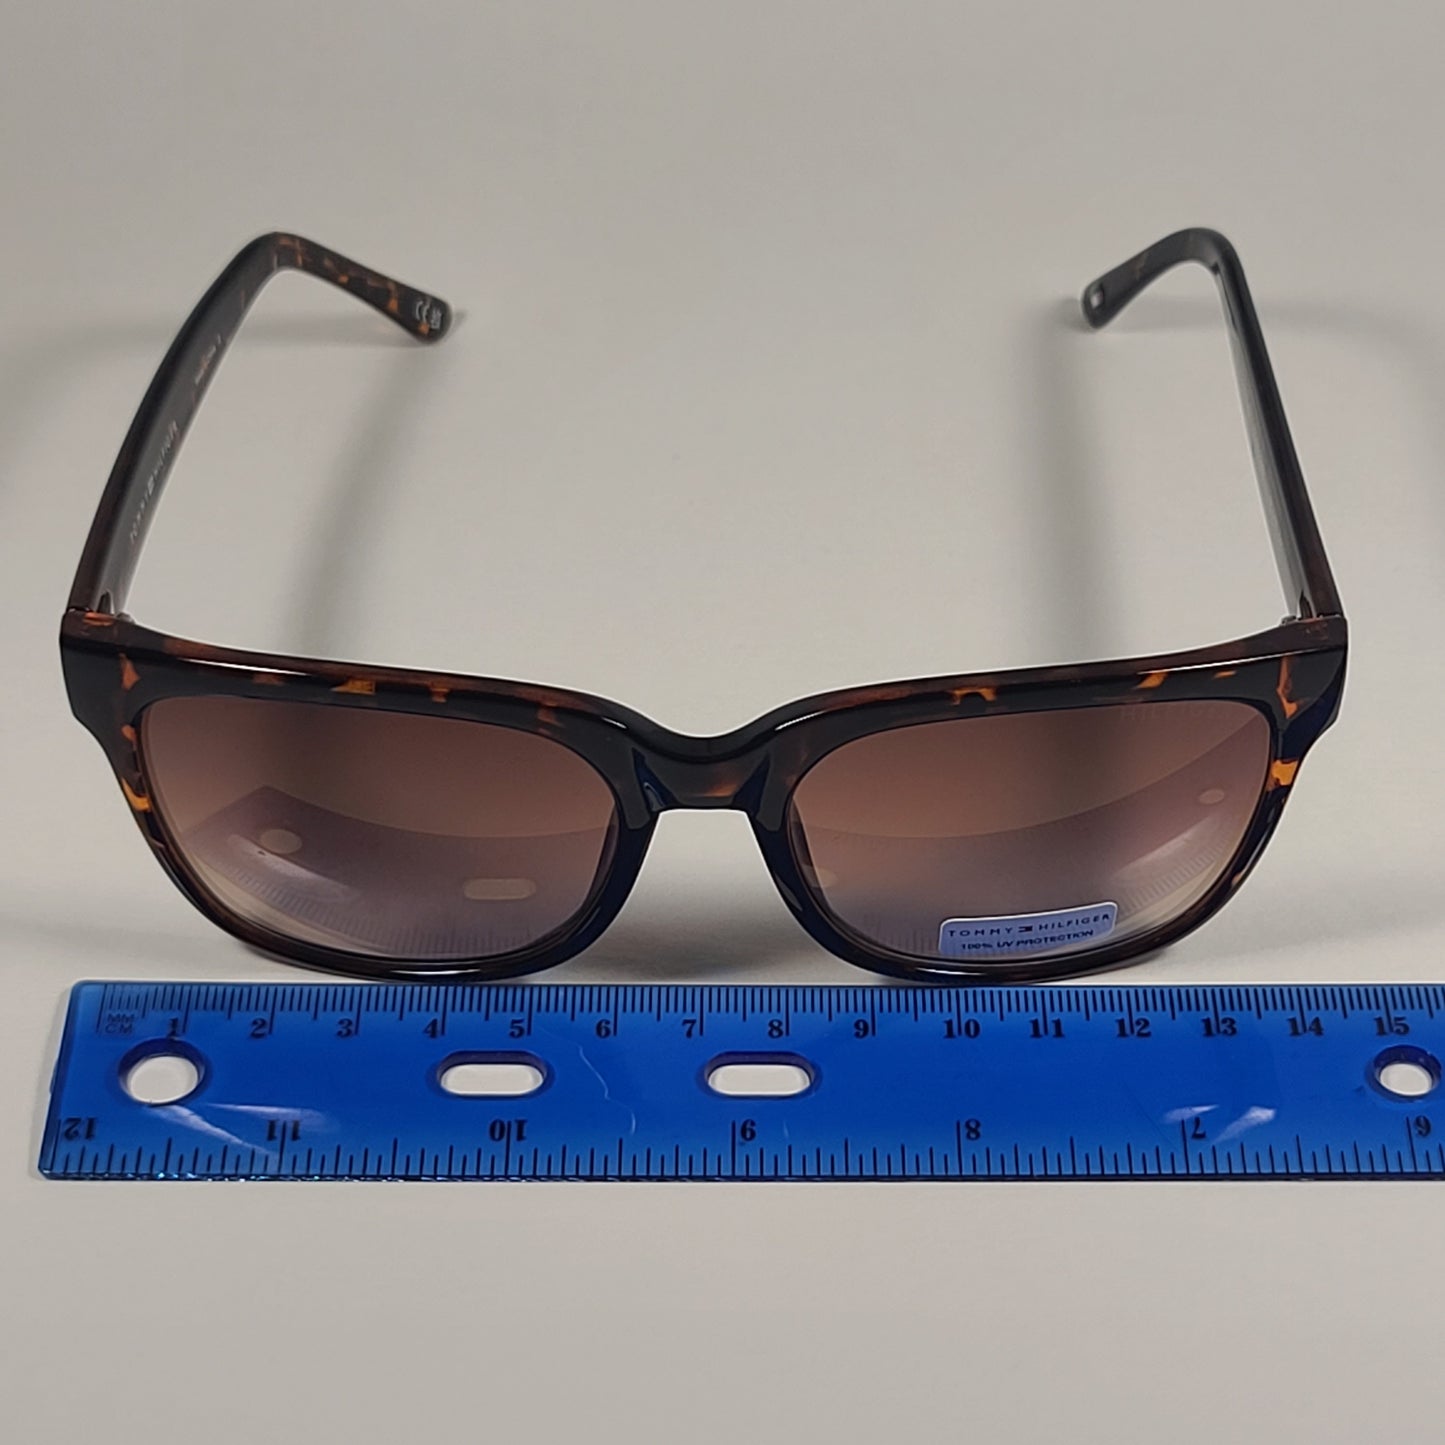 Tommy Hilfiger Lilly Square Sunglasses Brown Tortoise Frame Brown Gradient Lens LILLY WP OL481 - Sunglasses